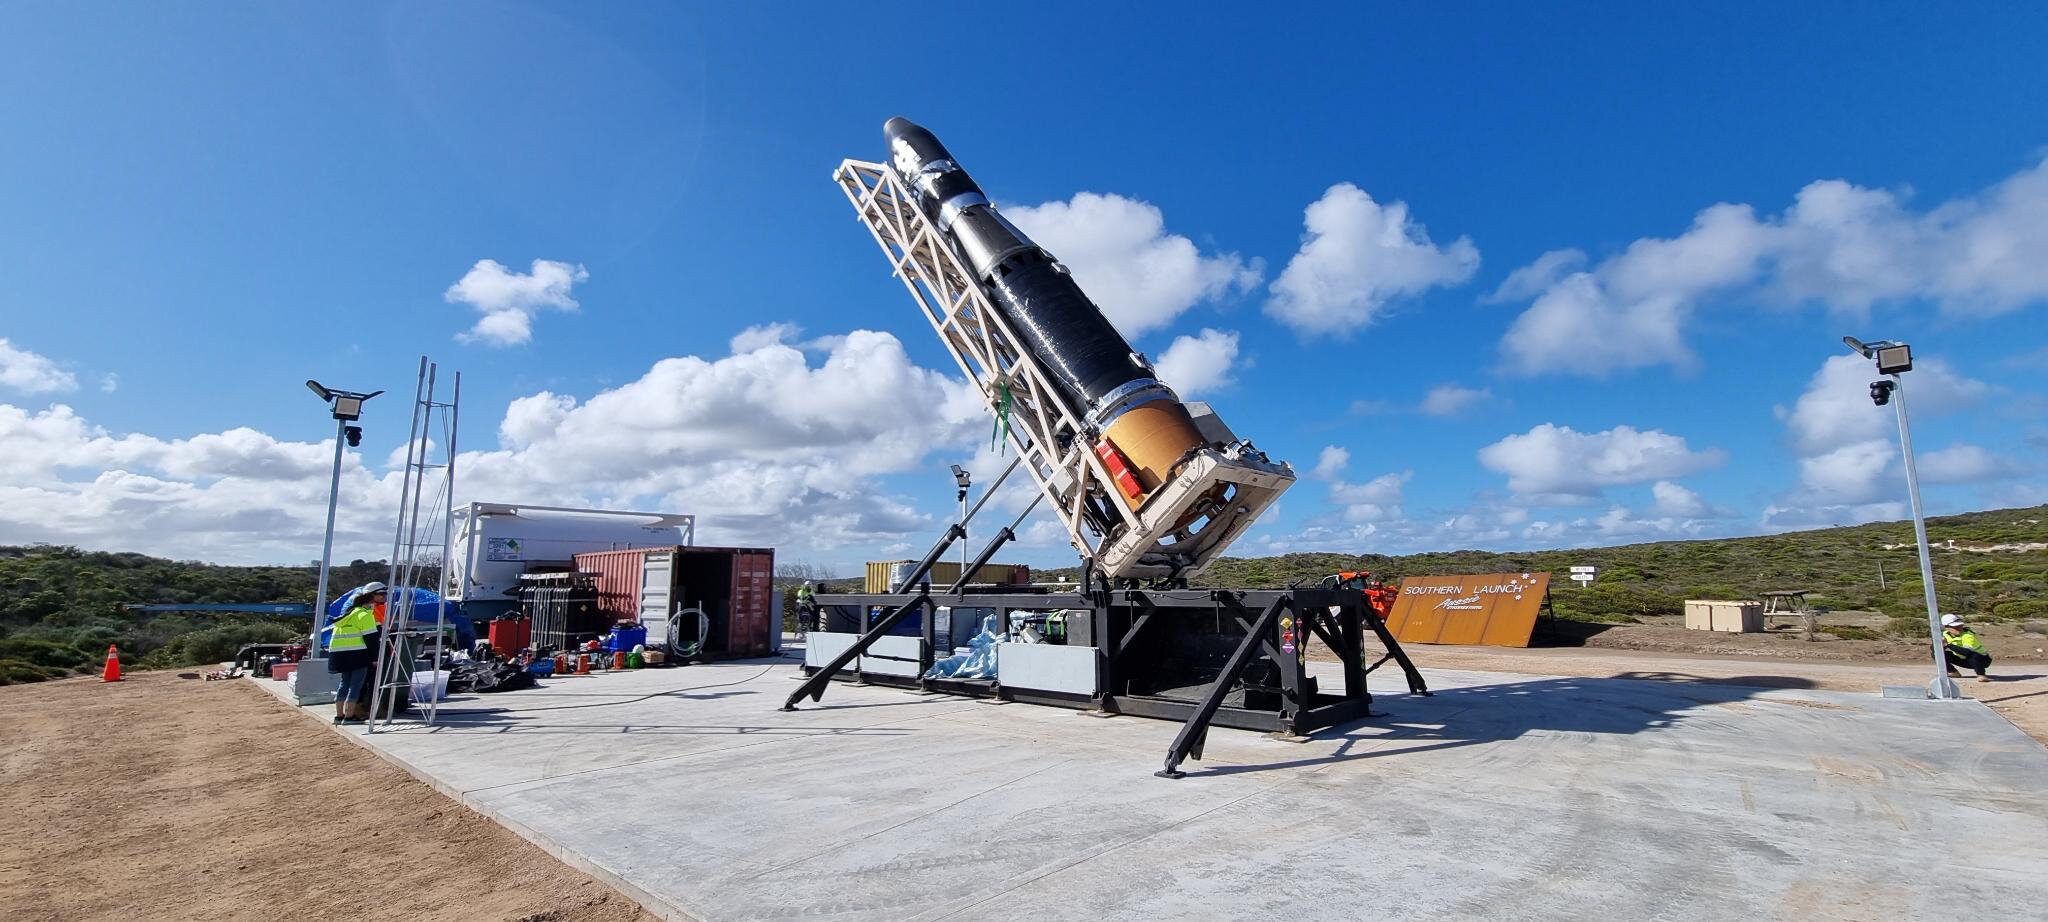 D2N provides comms for Southern Launch rocket launch facilities